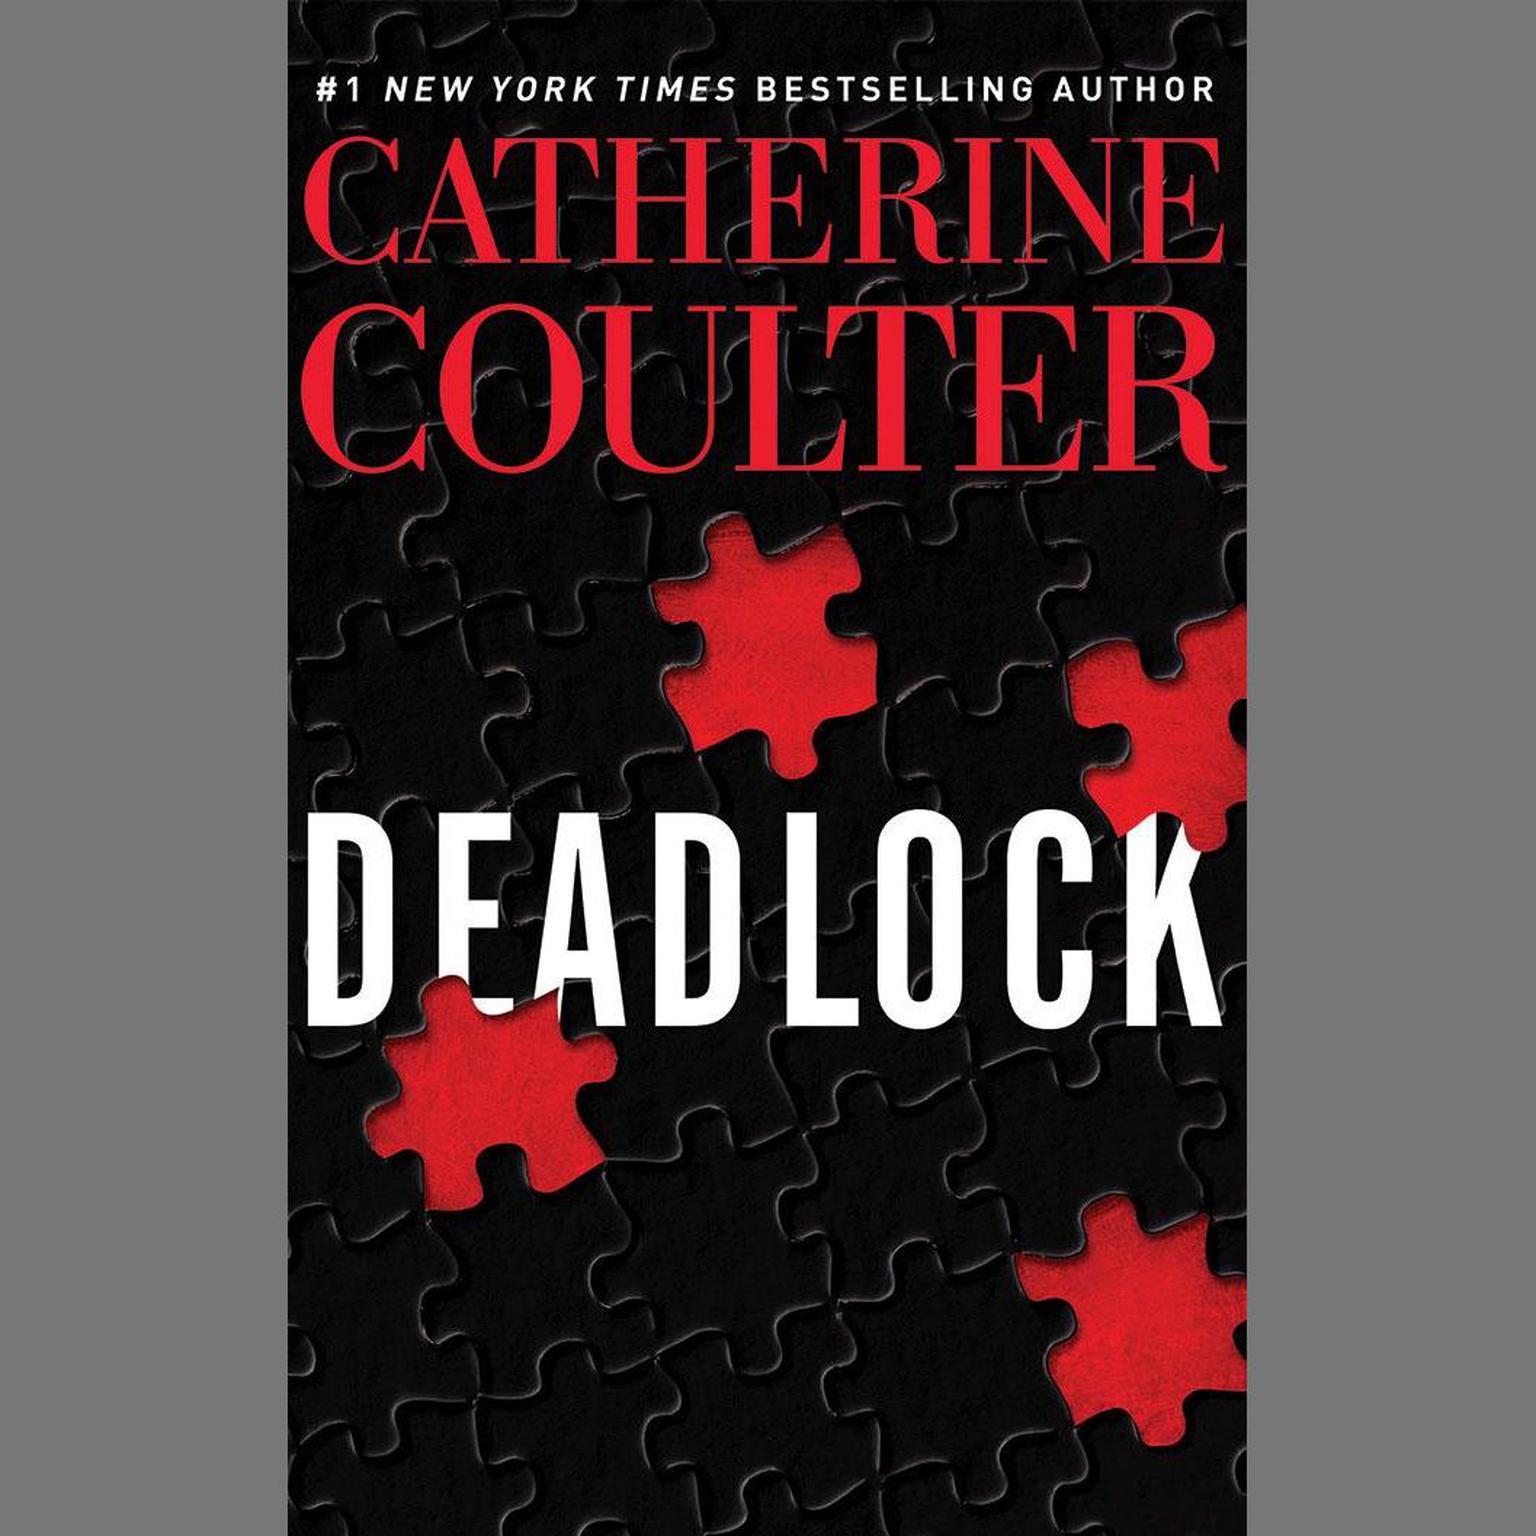 Deadlock Audiobook, by Catherine Coulter